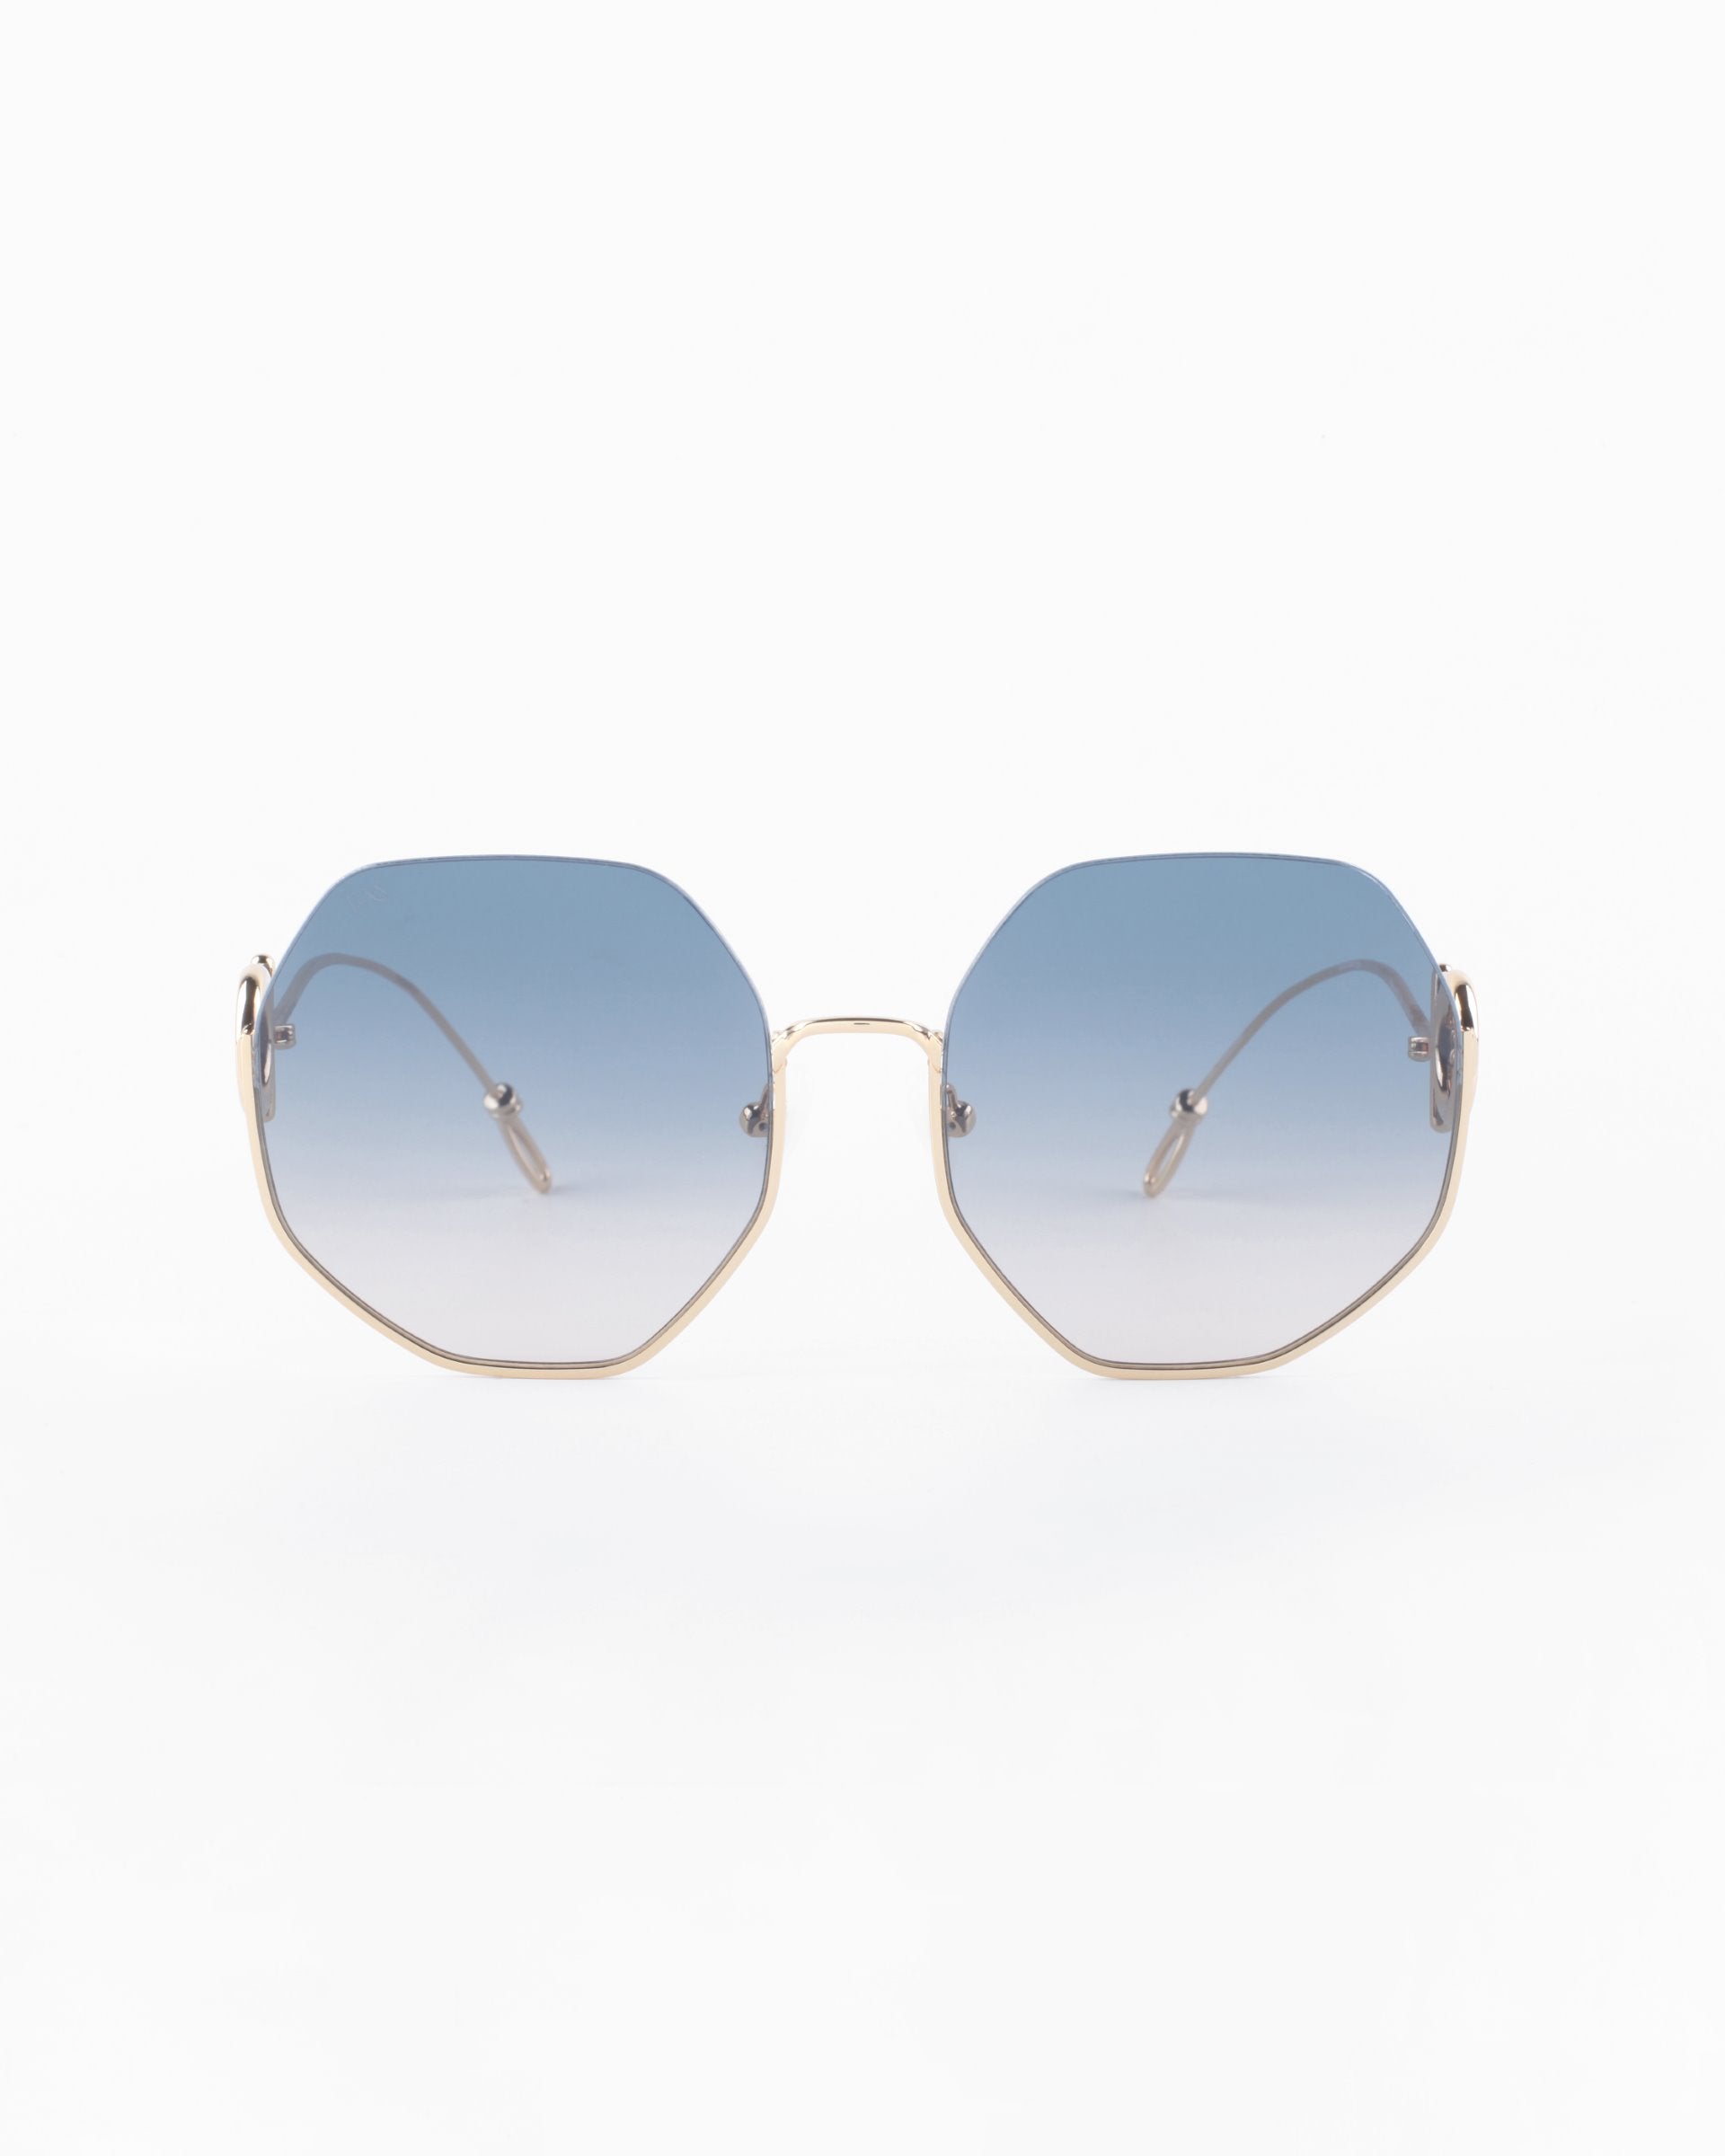 Front view of Palace sunglasses by For Art's Sake® with gradient blue lenses and thin 18-karat gold-plated frames. The arms of the sunglasses are also gold, with white earpieces. These UVA & UVB-protected sunglasses are Limited Edition. The image has a clean white background.